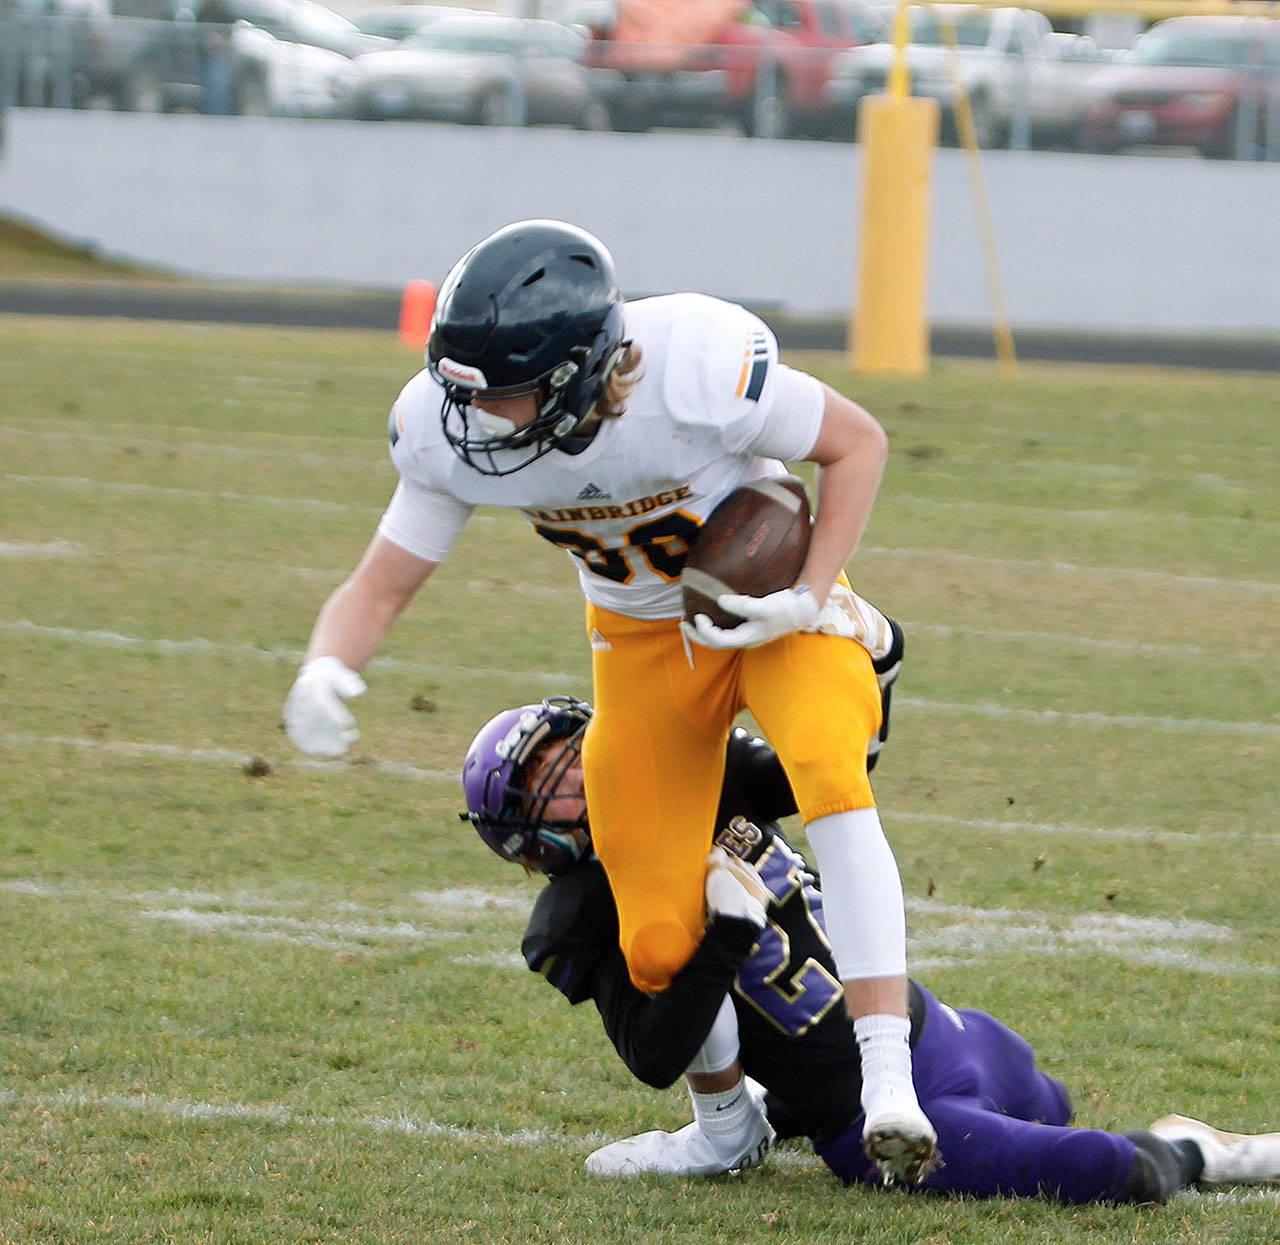 Alan Ullin tries to evade the grip of a Sequim tackler after making a catch. (Mark Krulish/Kitsap News Group)